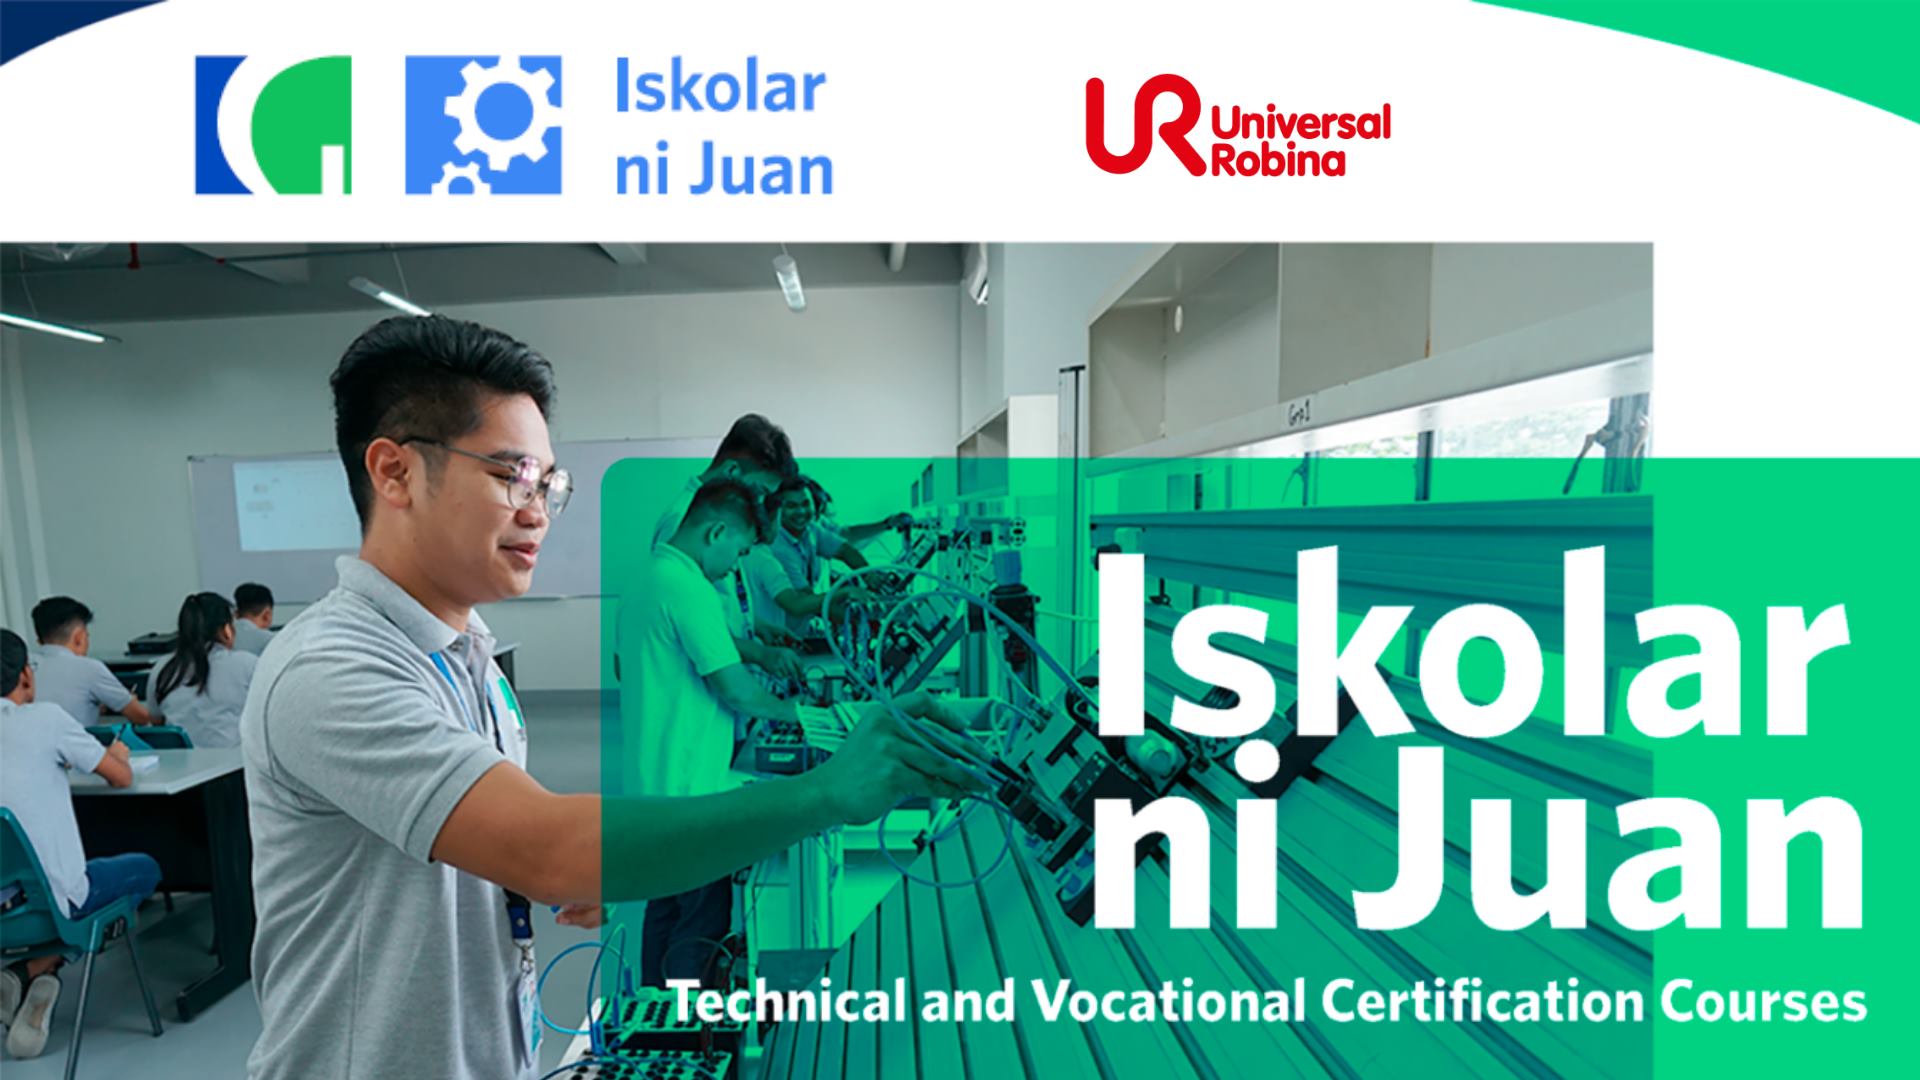 GBF’s Technical Training Center Continues to Fuel Dreams with the Iskolar Ni Juan Initiative